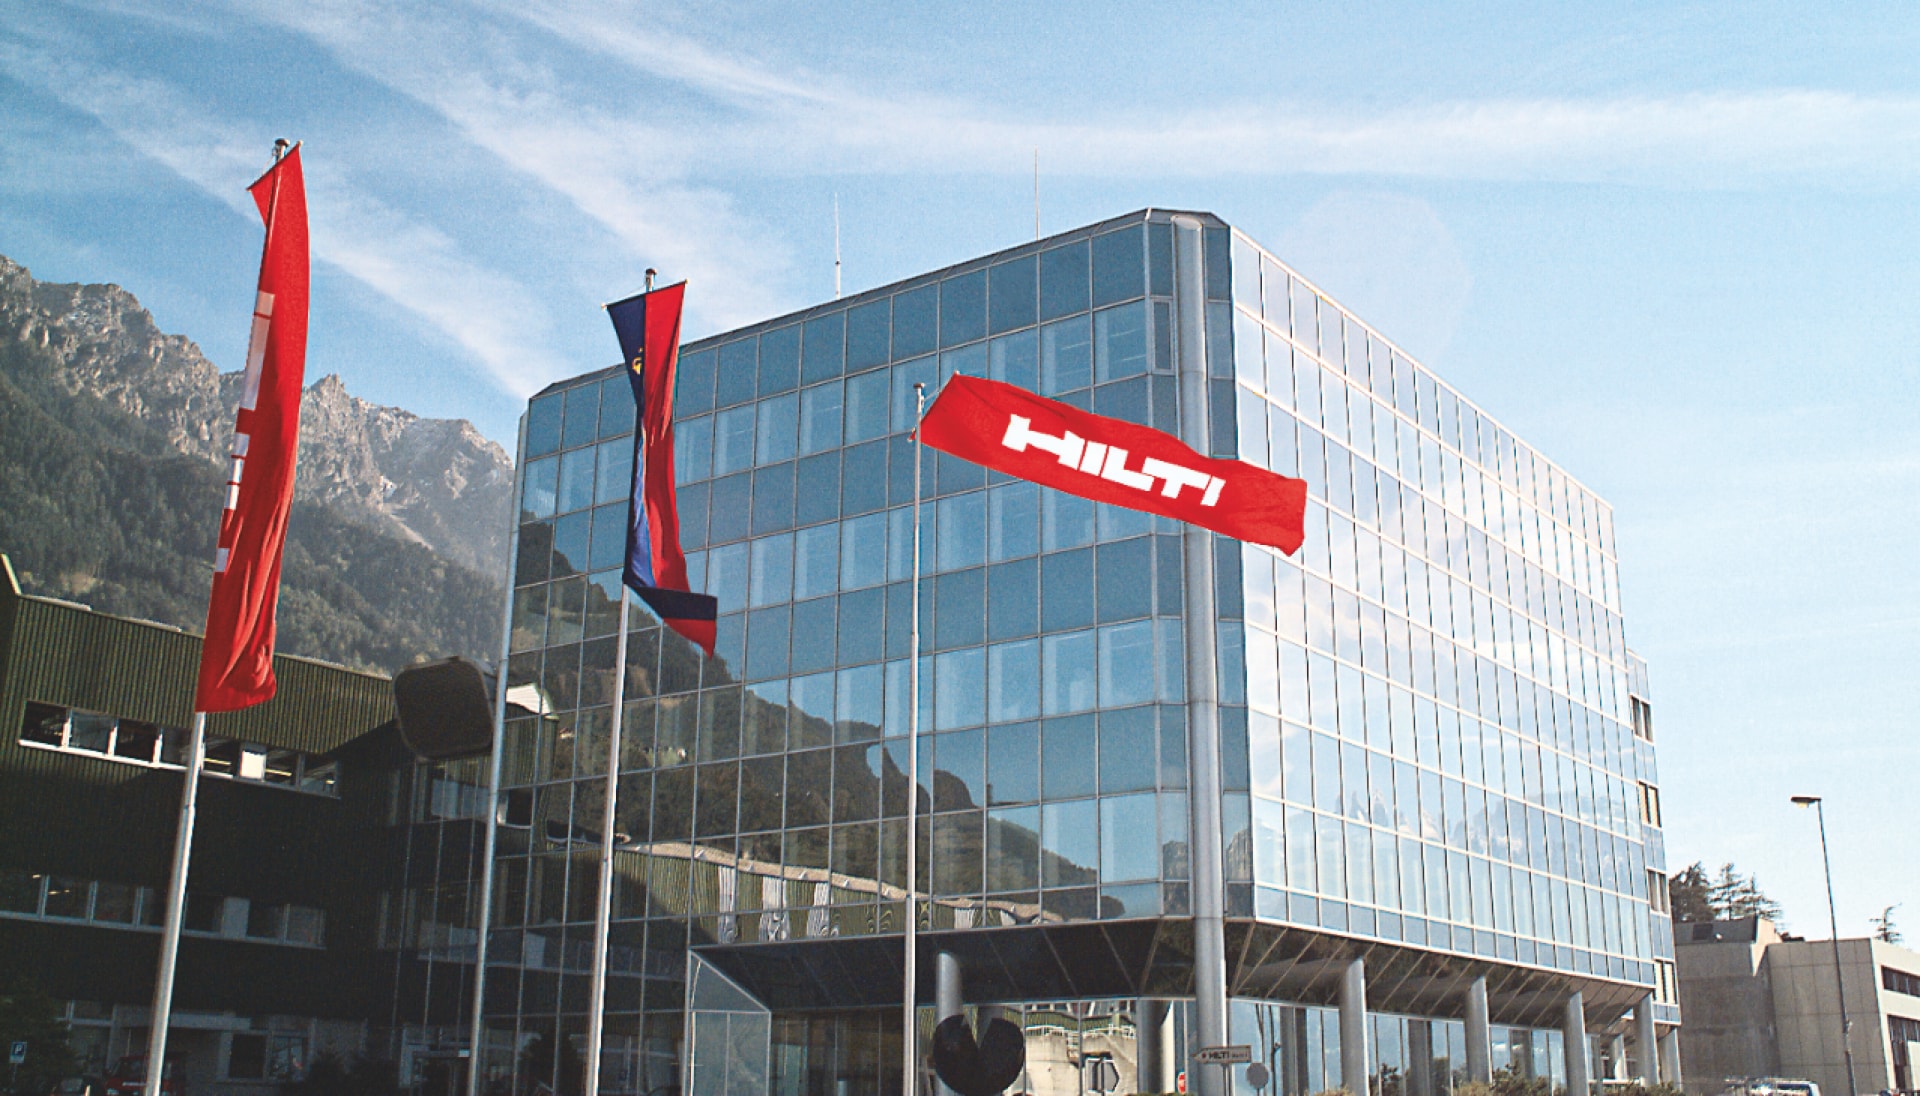 . At Hilti, we build and design leading-edge technology, software, and services that power the construction industry. 